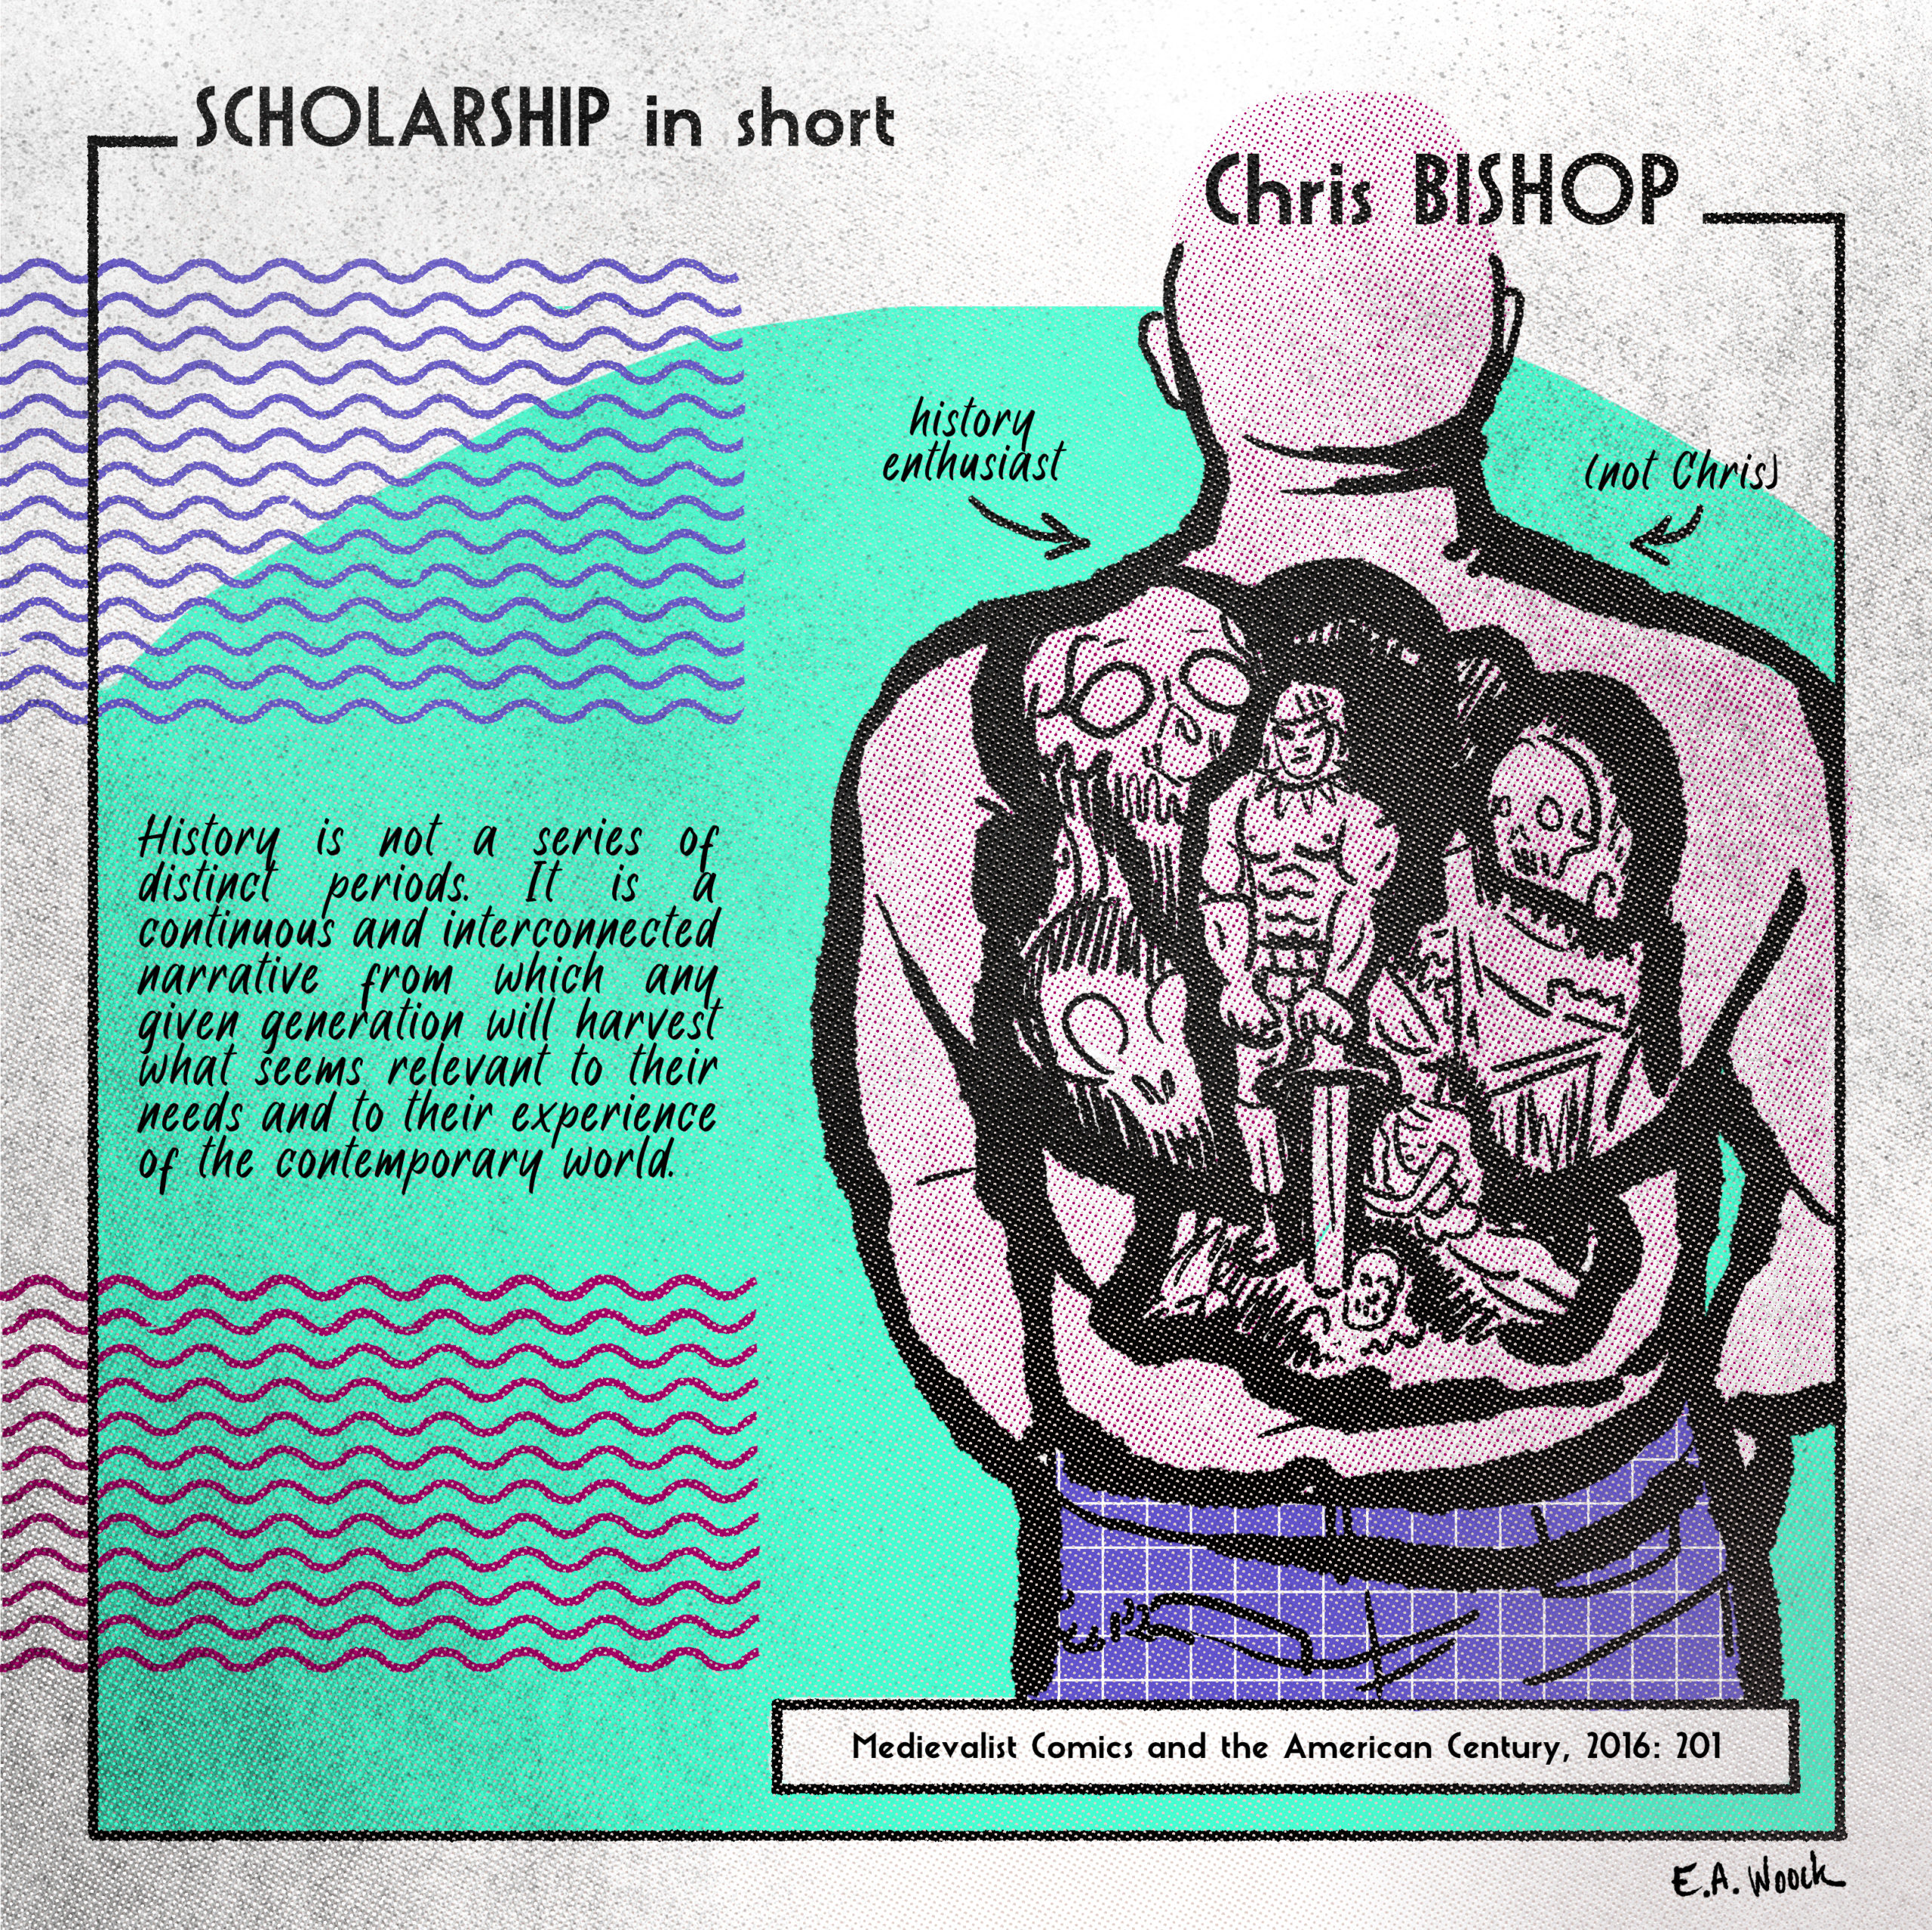 Chris Bishop, Medievalist Comics and the American Century  (University Press of Mississippi: 2016)